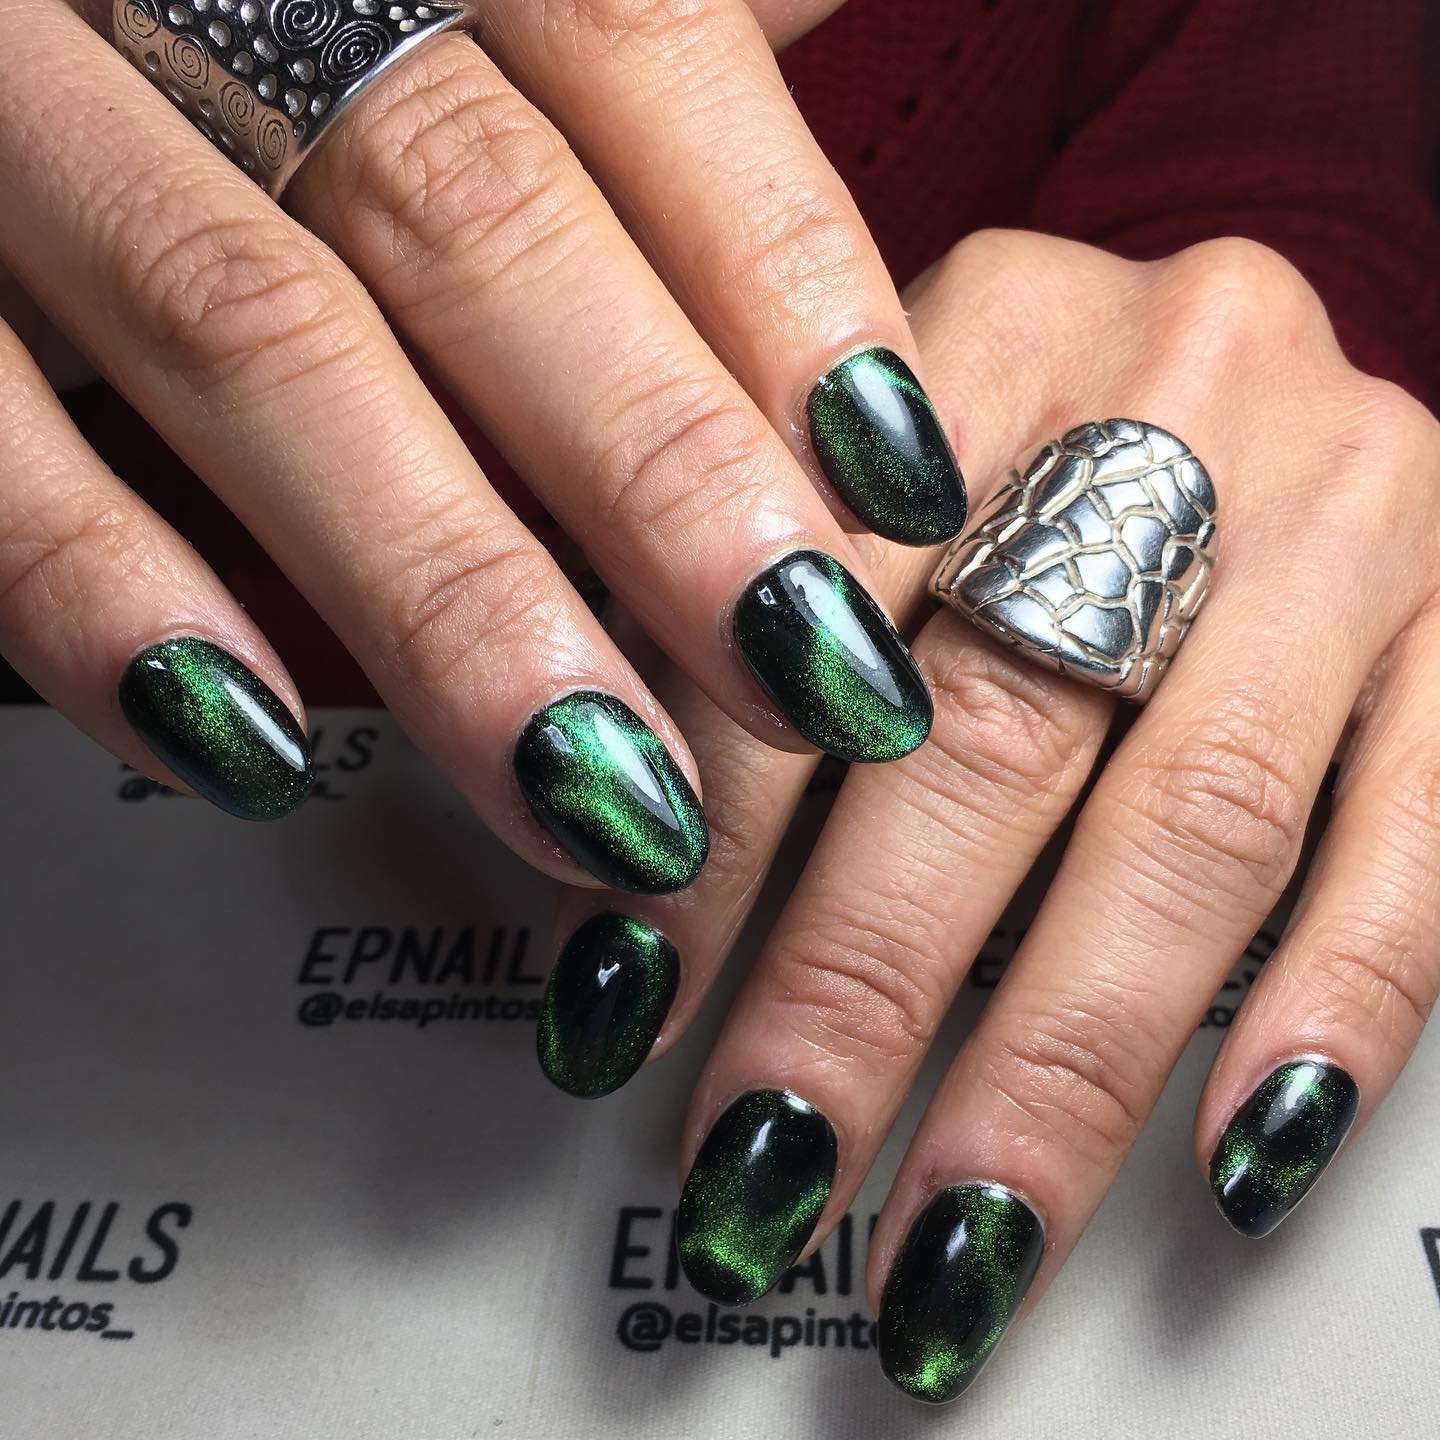 You will be on fire with these nails! Green color will make you feel peaceful and energetic.